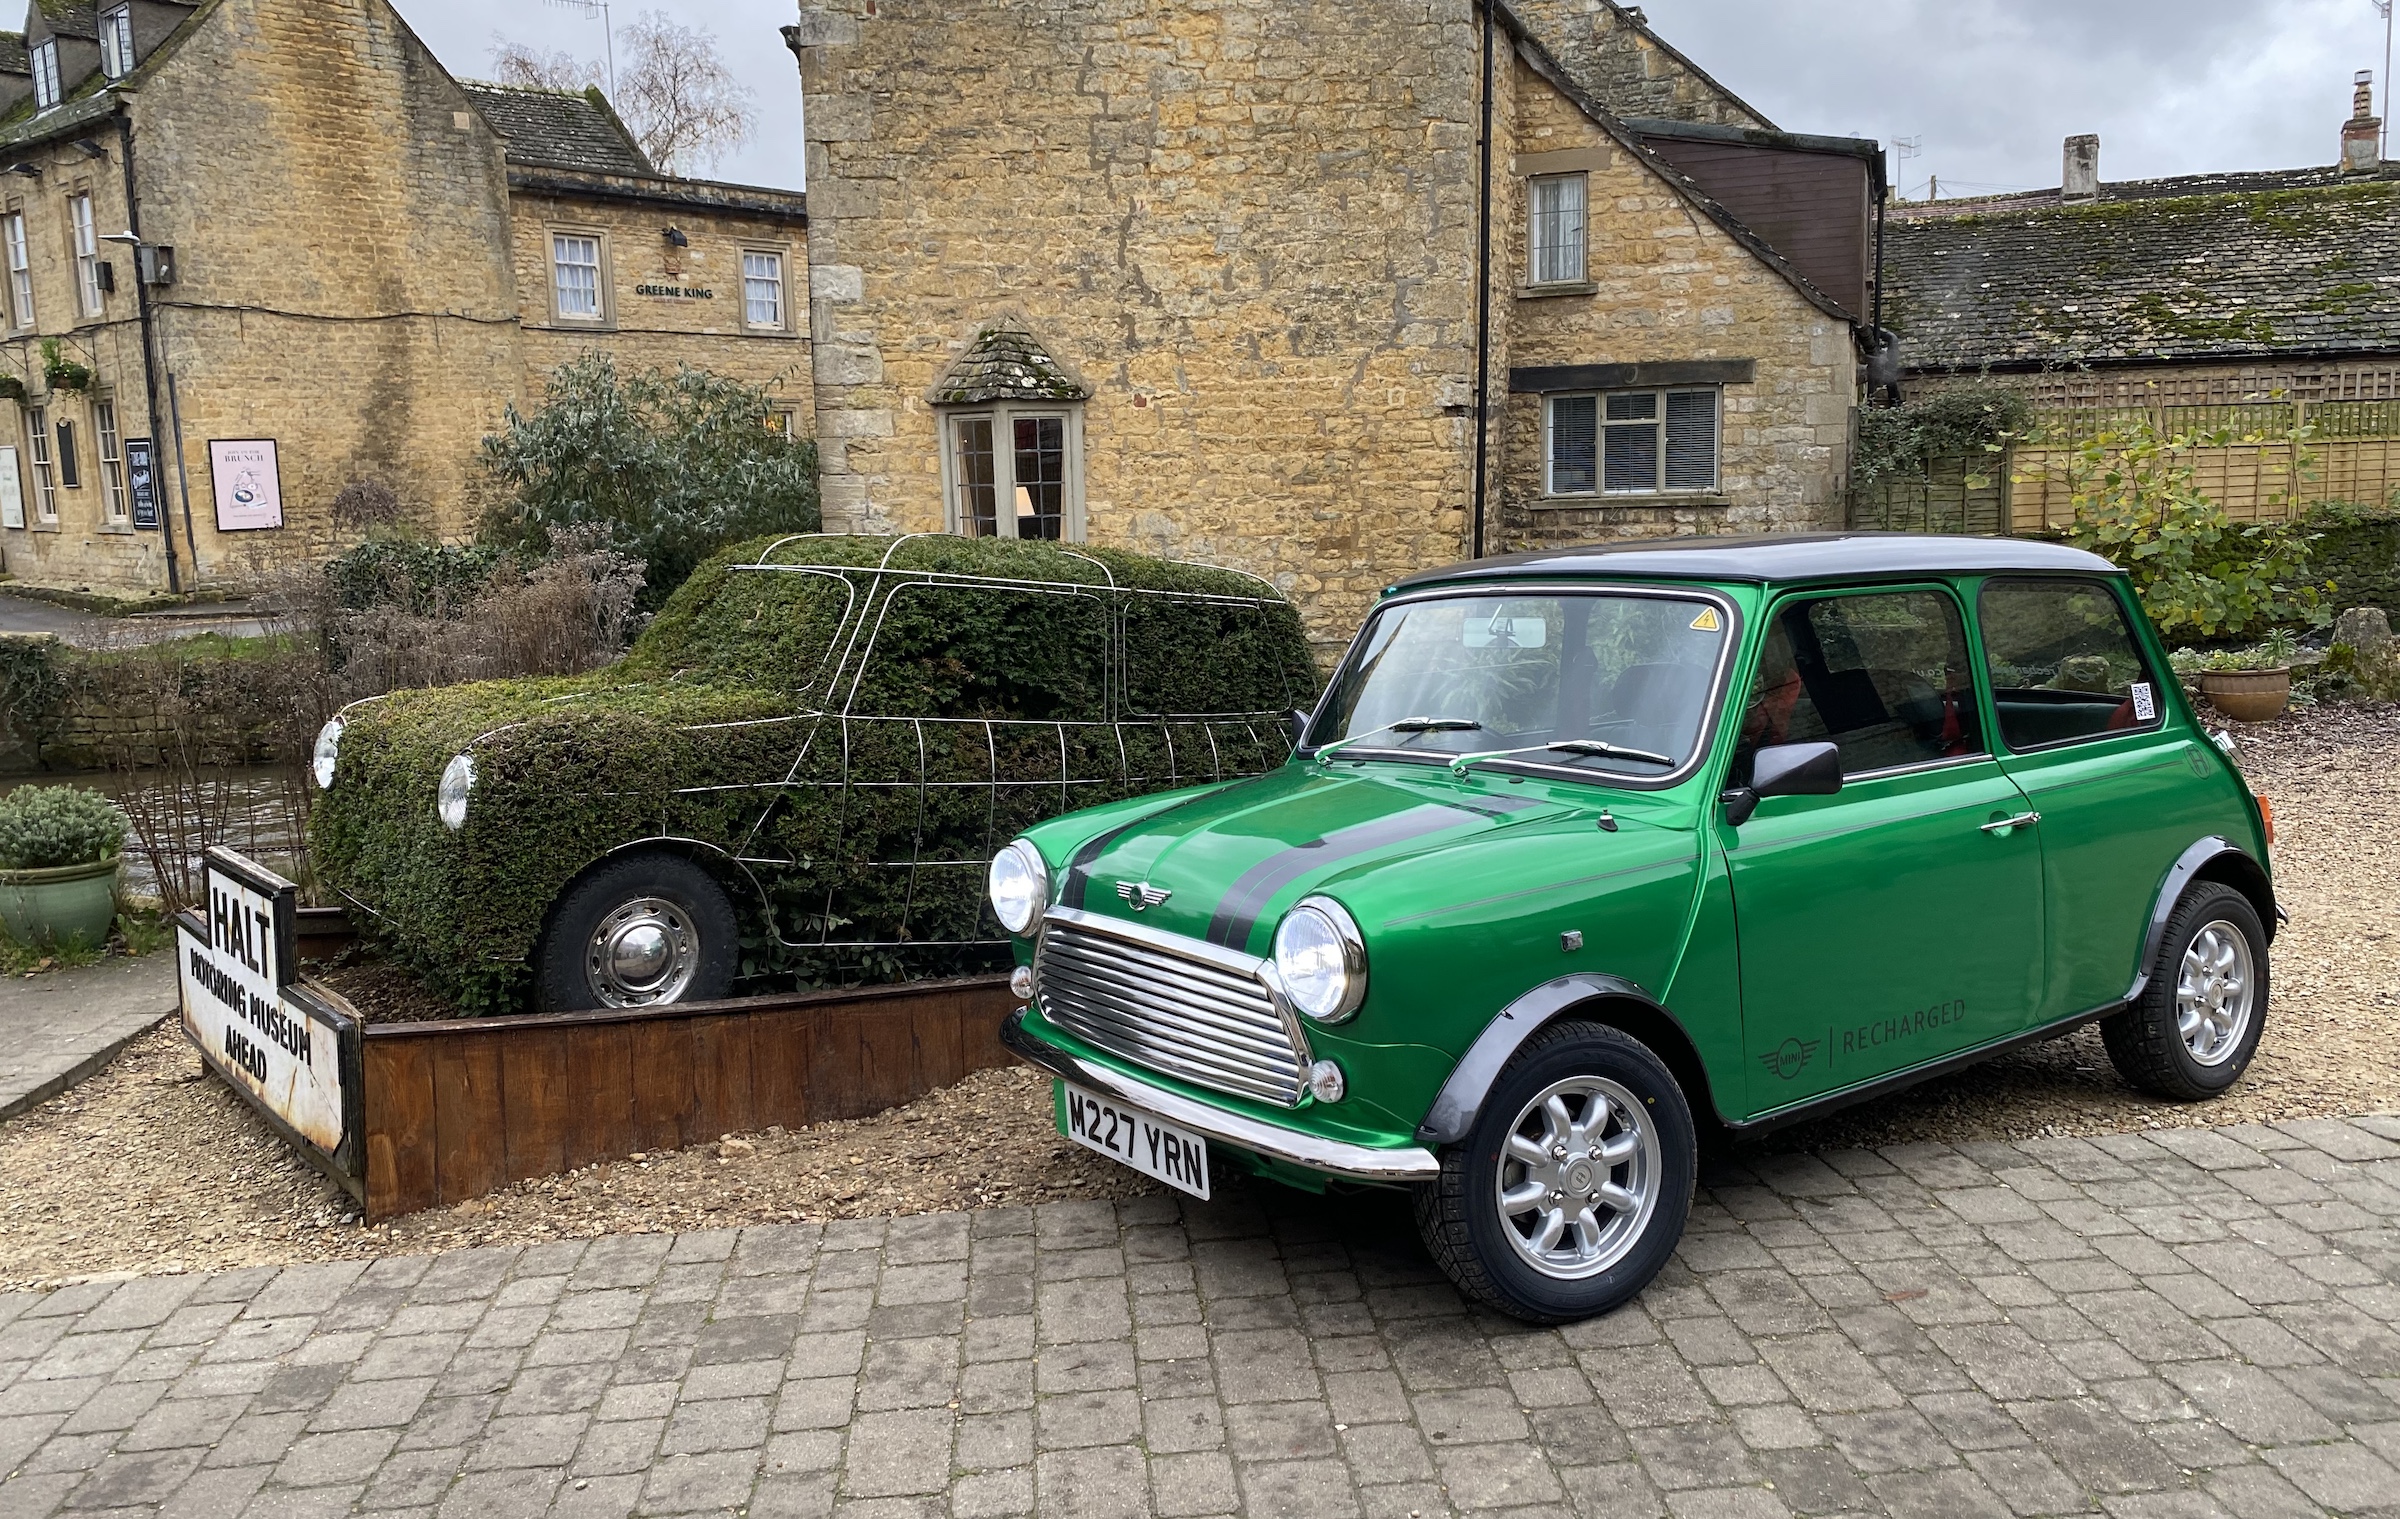 Charging around: Electric Mini Recharged driven